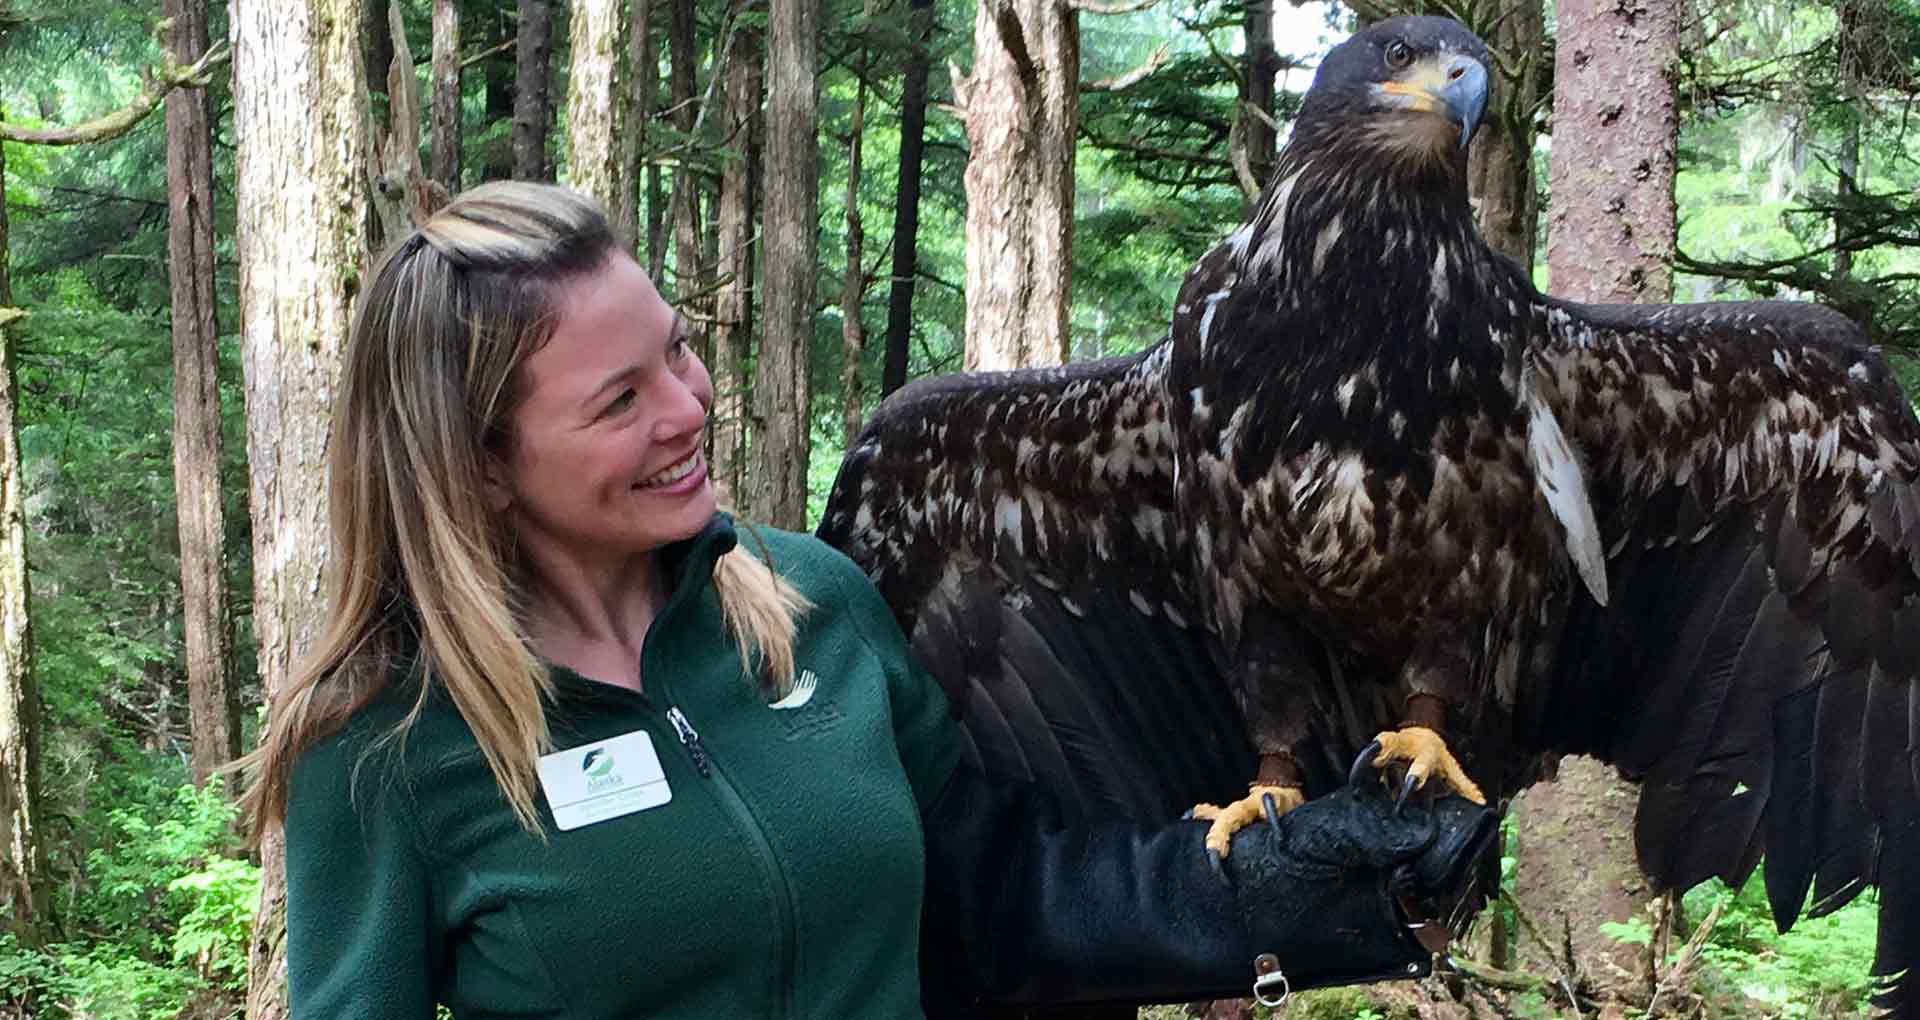 Learn from wildlife specialists about the rehabilitation that takes place for these incredible Alaskan birds right here in Sitka.